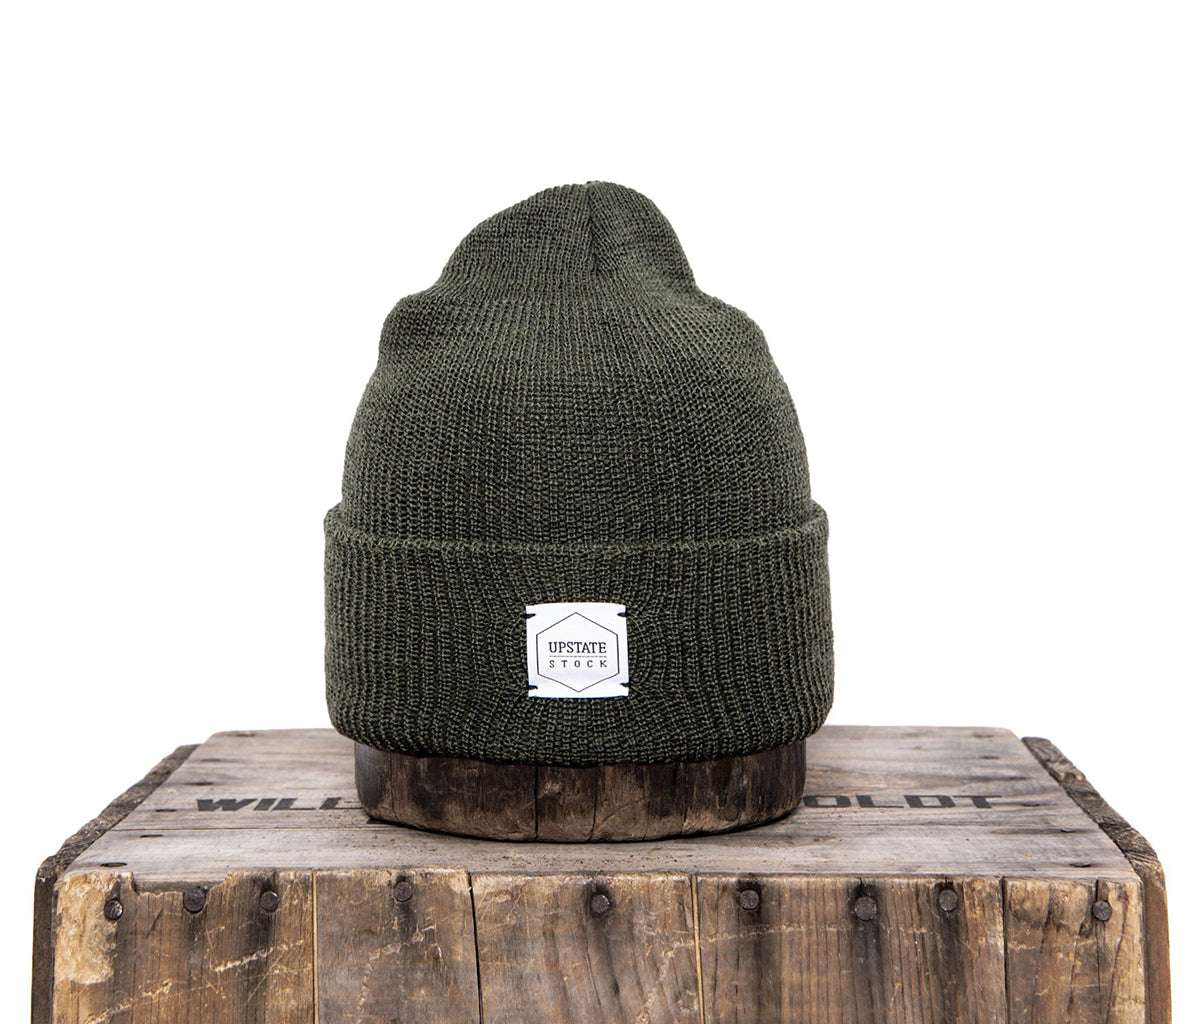 Upstate Stock 100% Wool Watchcap - Olive